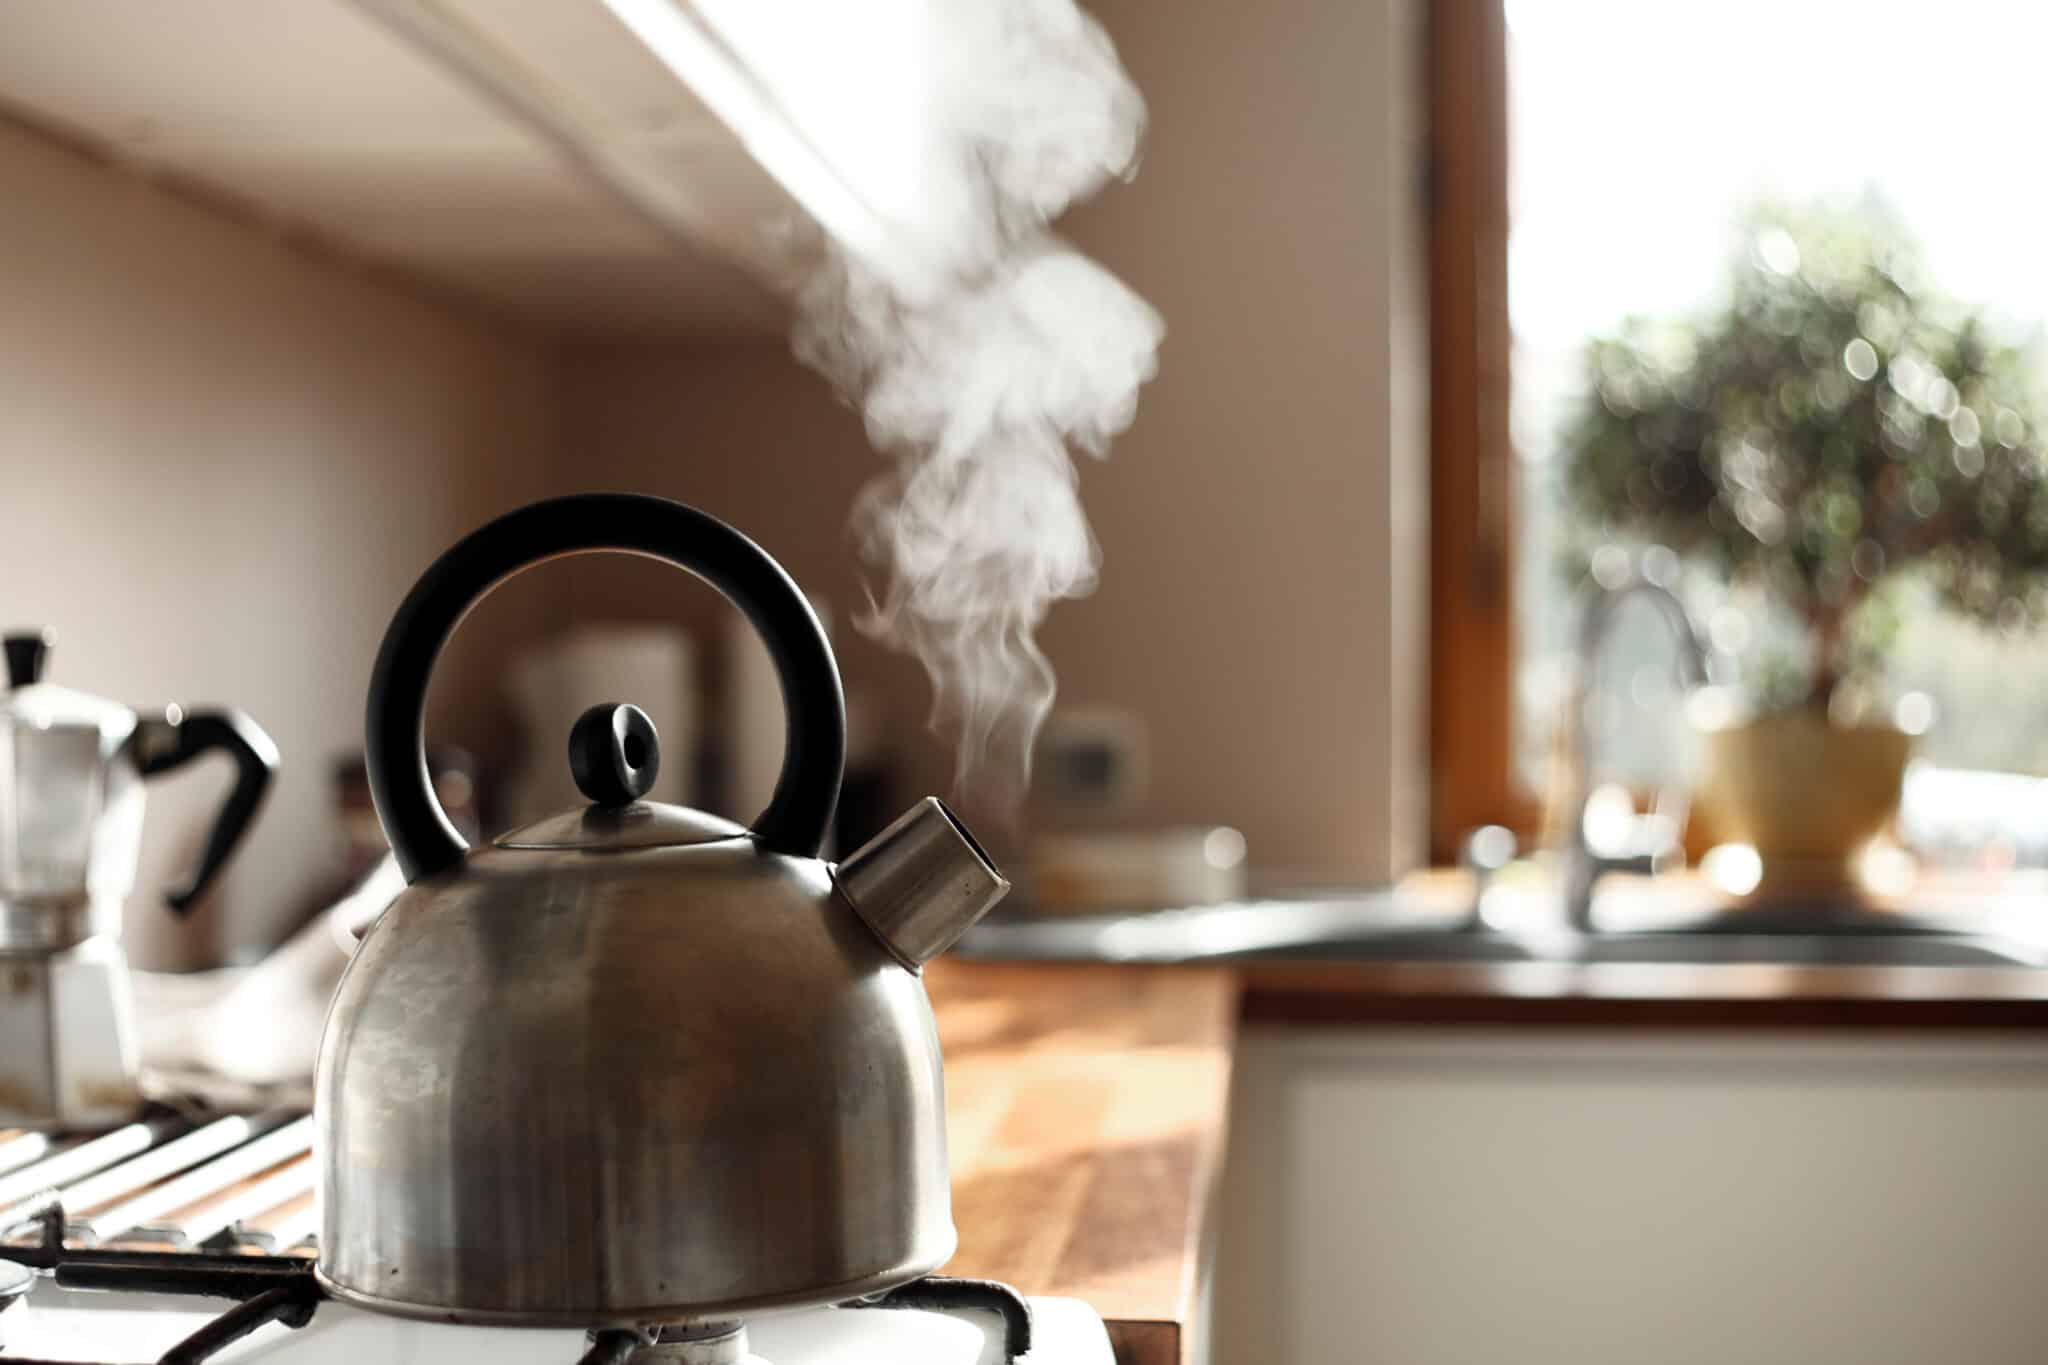 Are Kettles Under Cabinets Safe? – Here’s What You Should Know